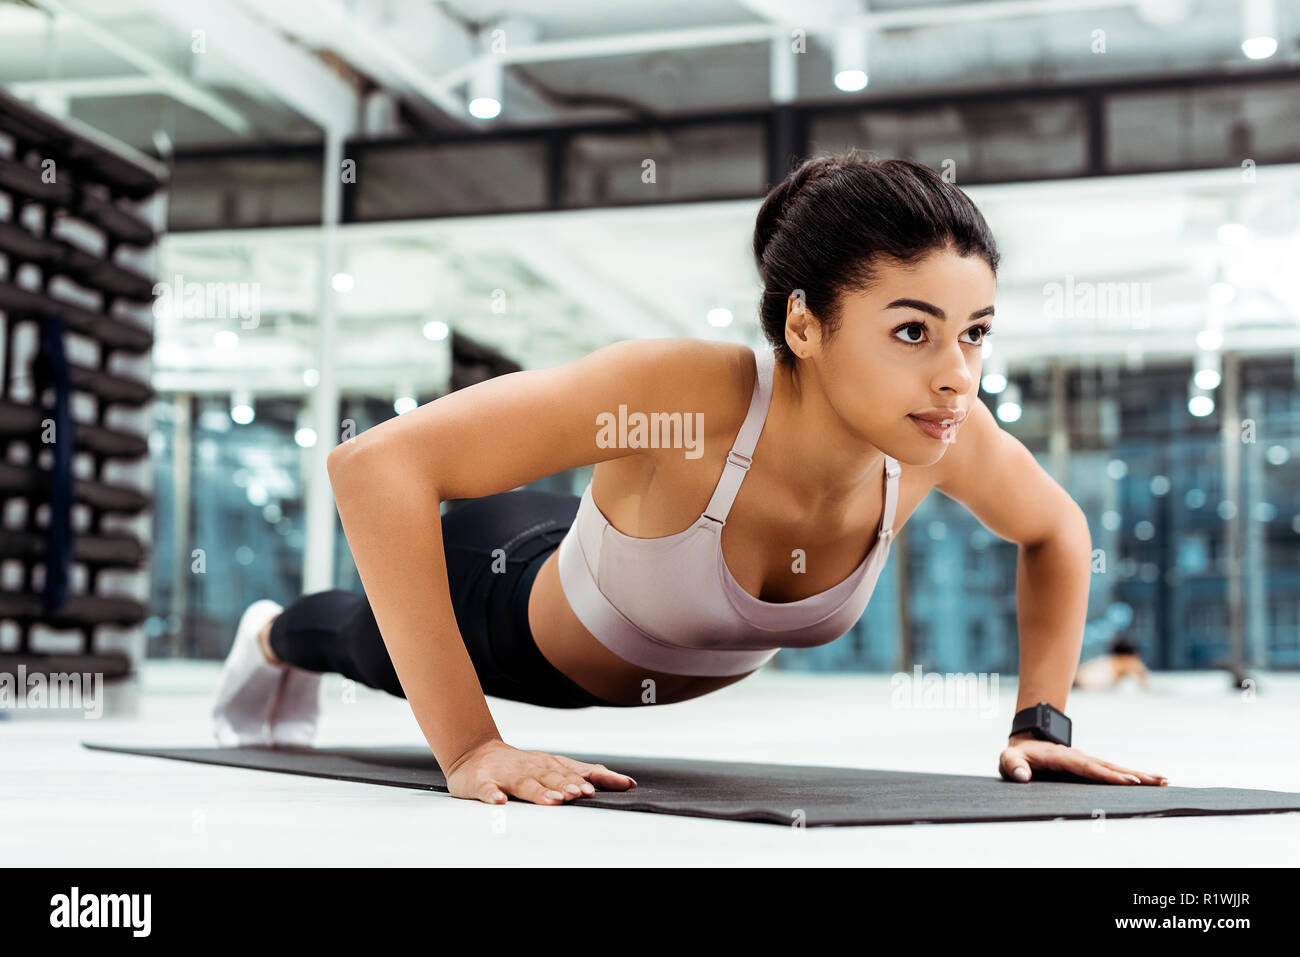 Wonderful young girl doing push ups on mat in fitness gym Stock Photo